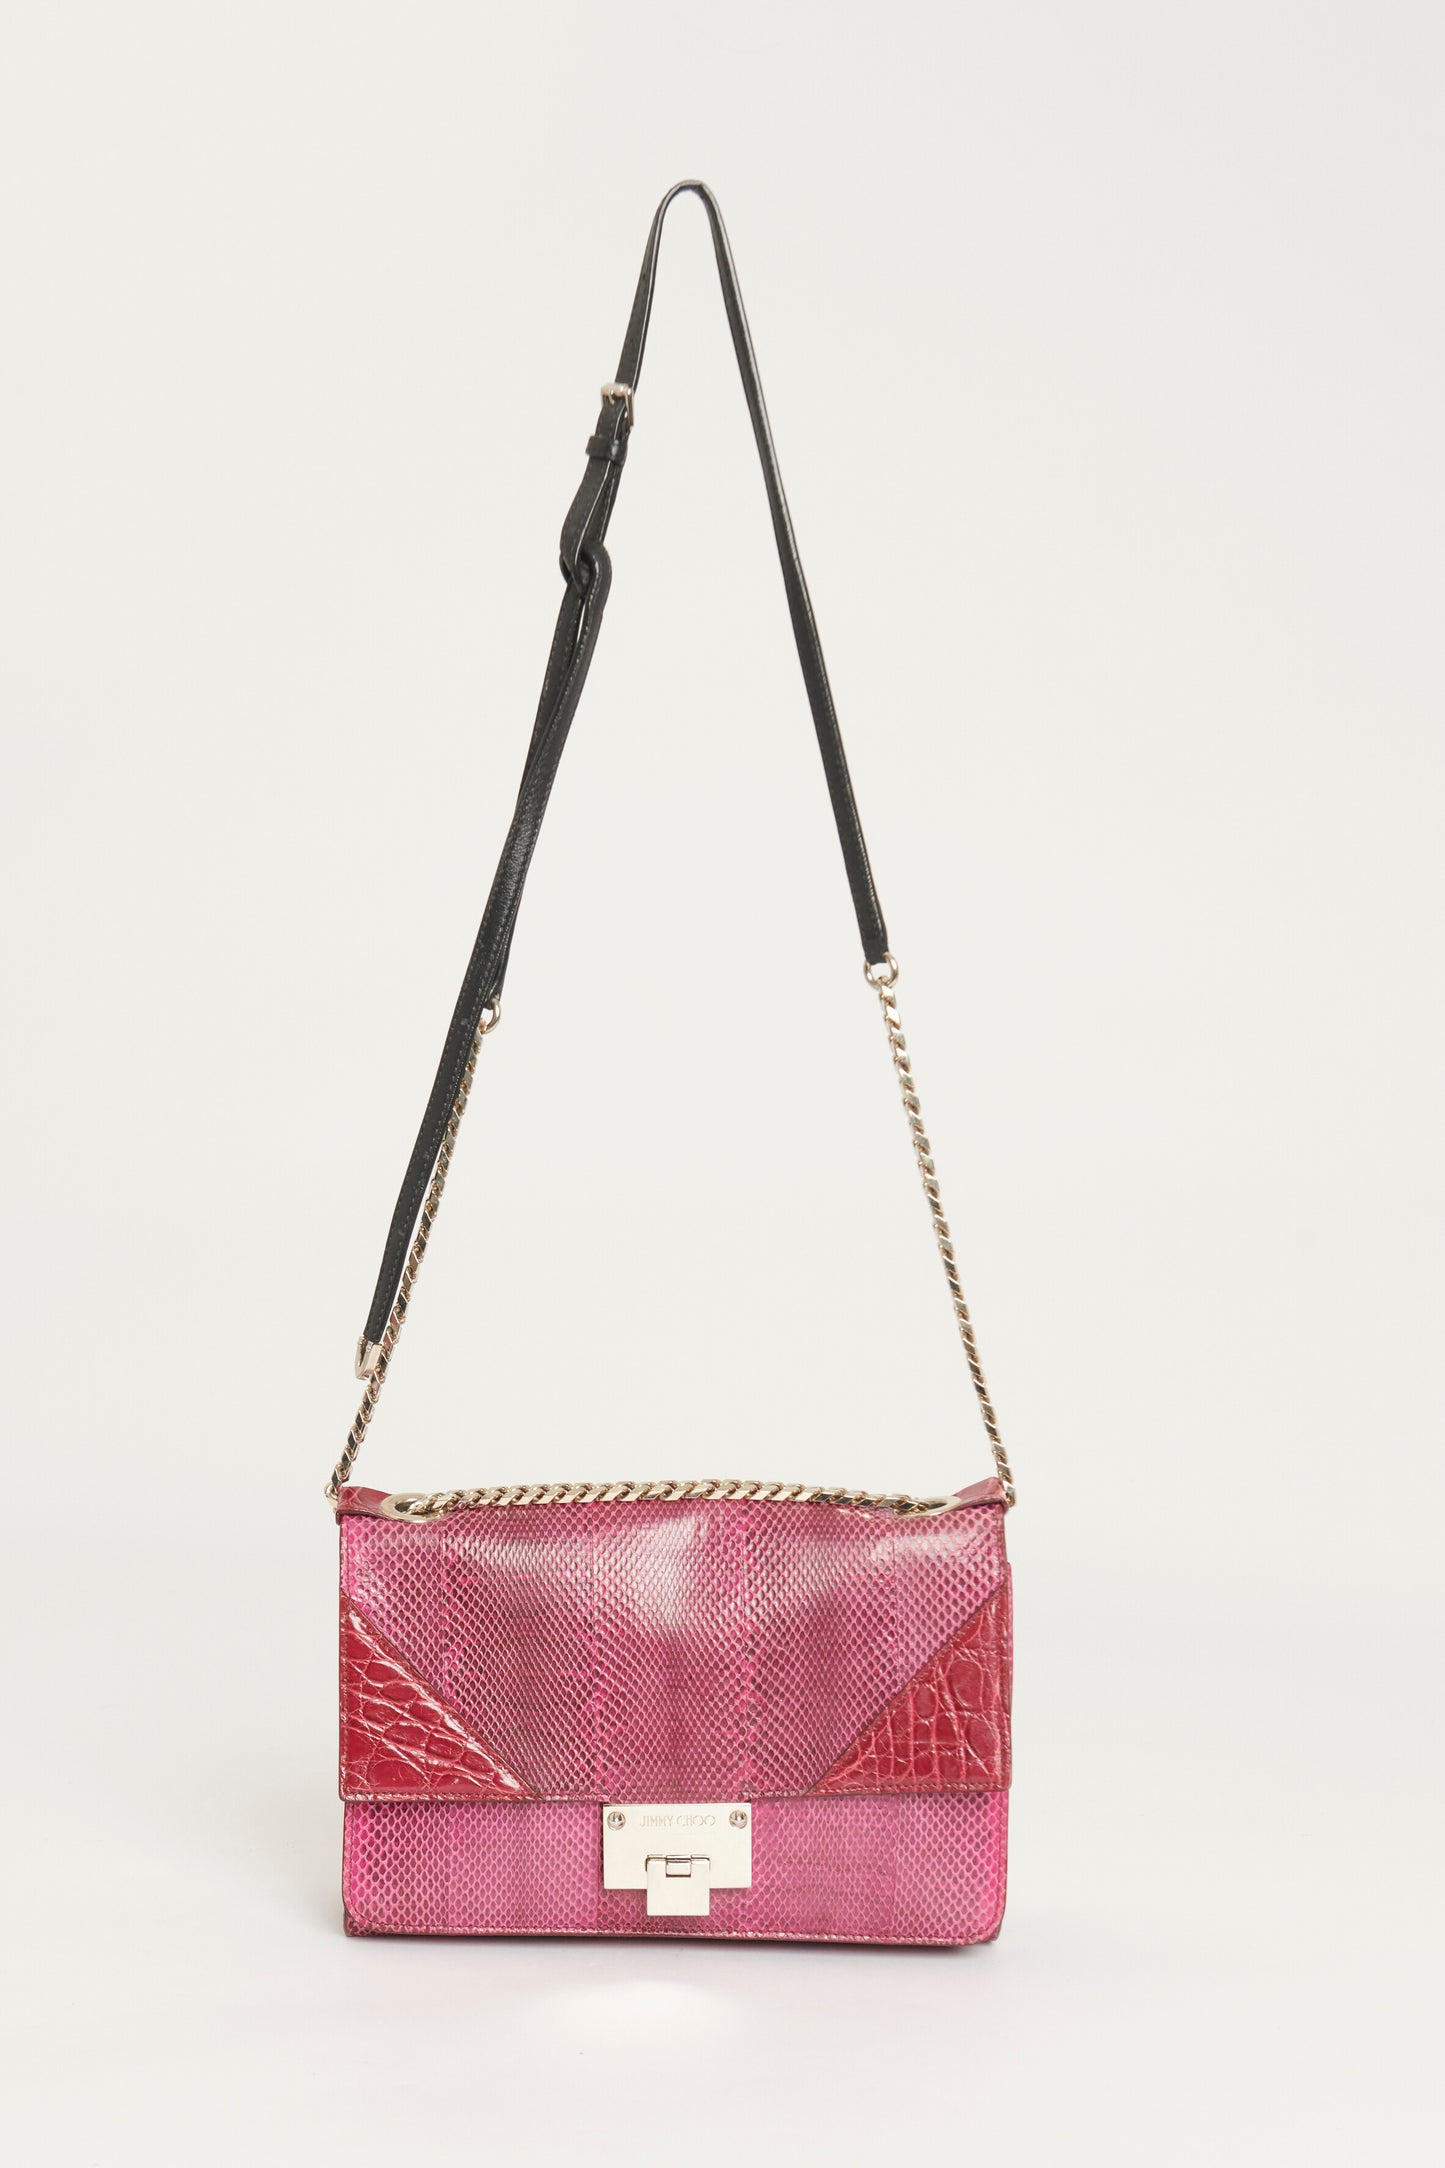 Fuchsia Python Preowned Flap Bag With Alligator Details